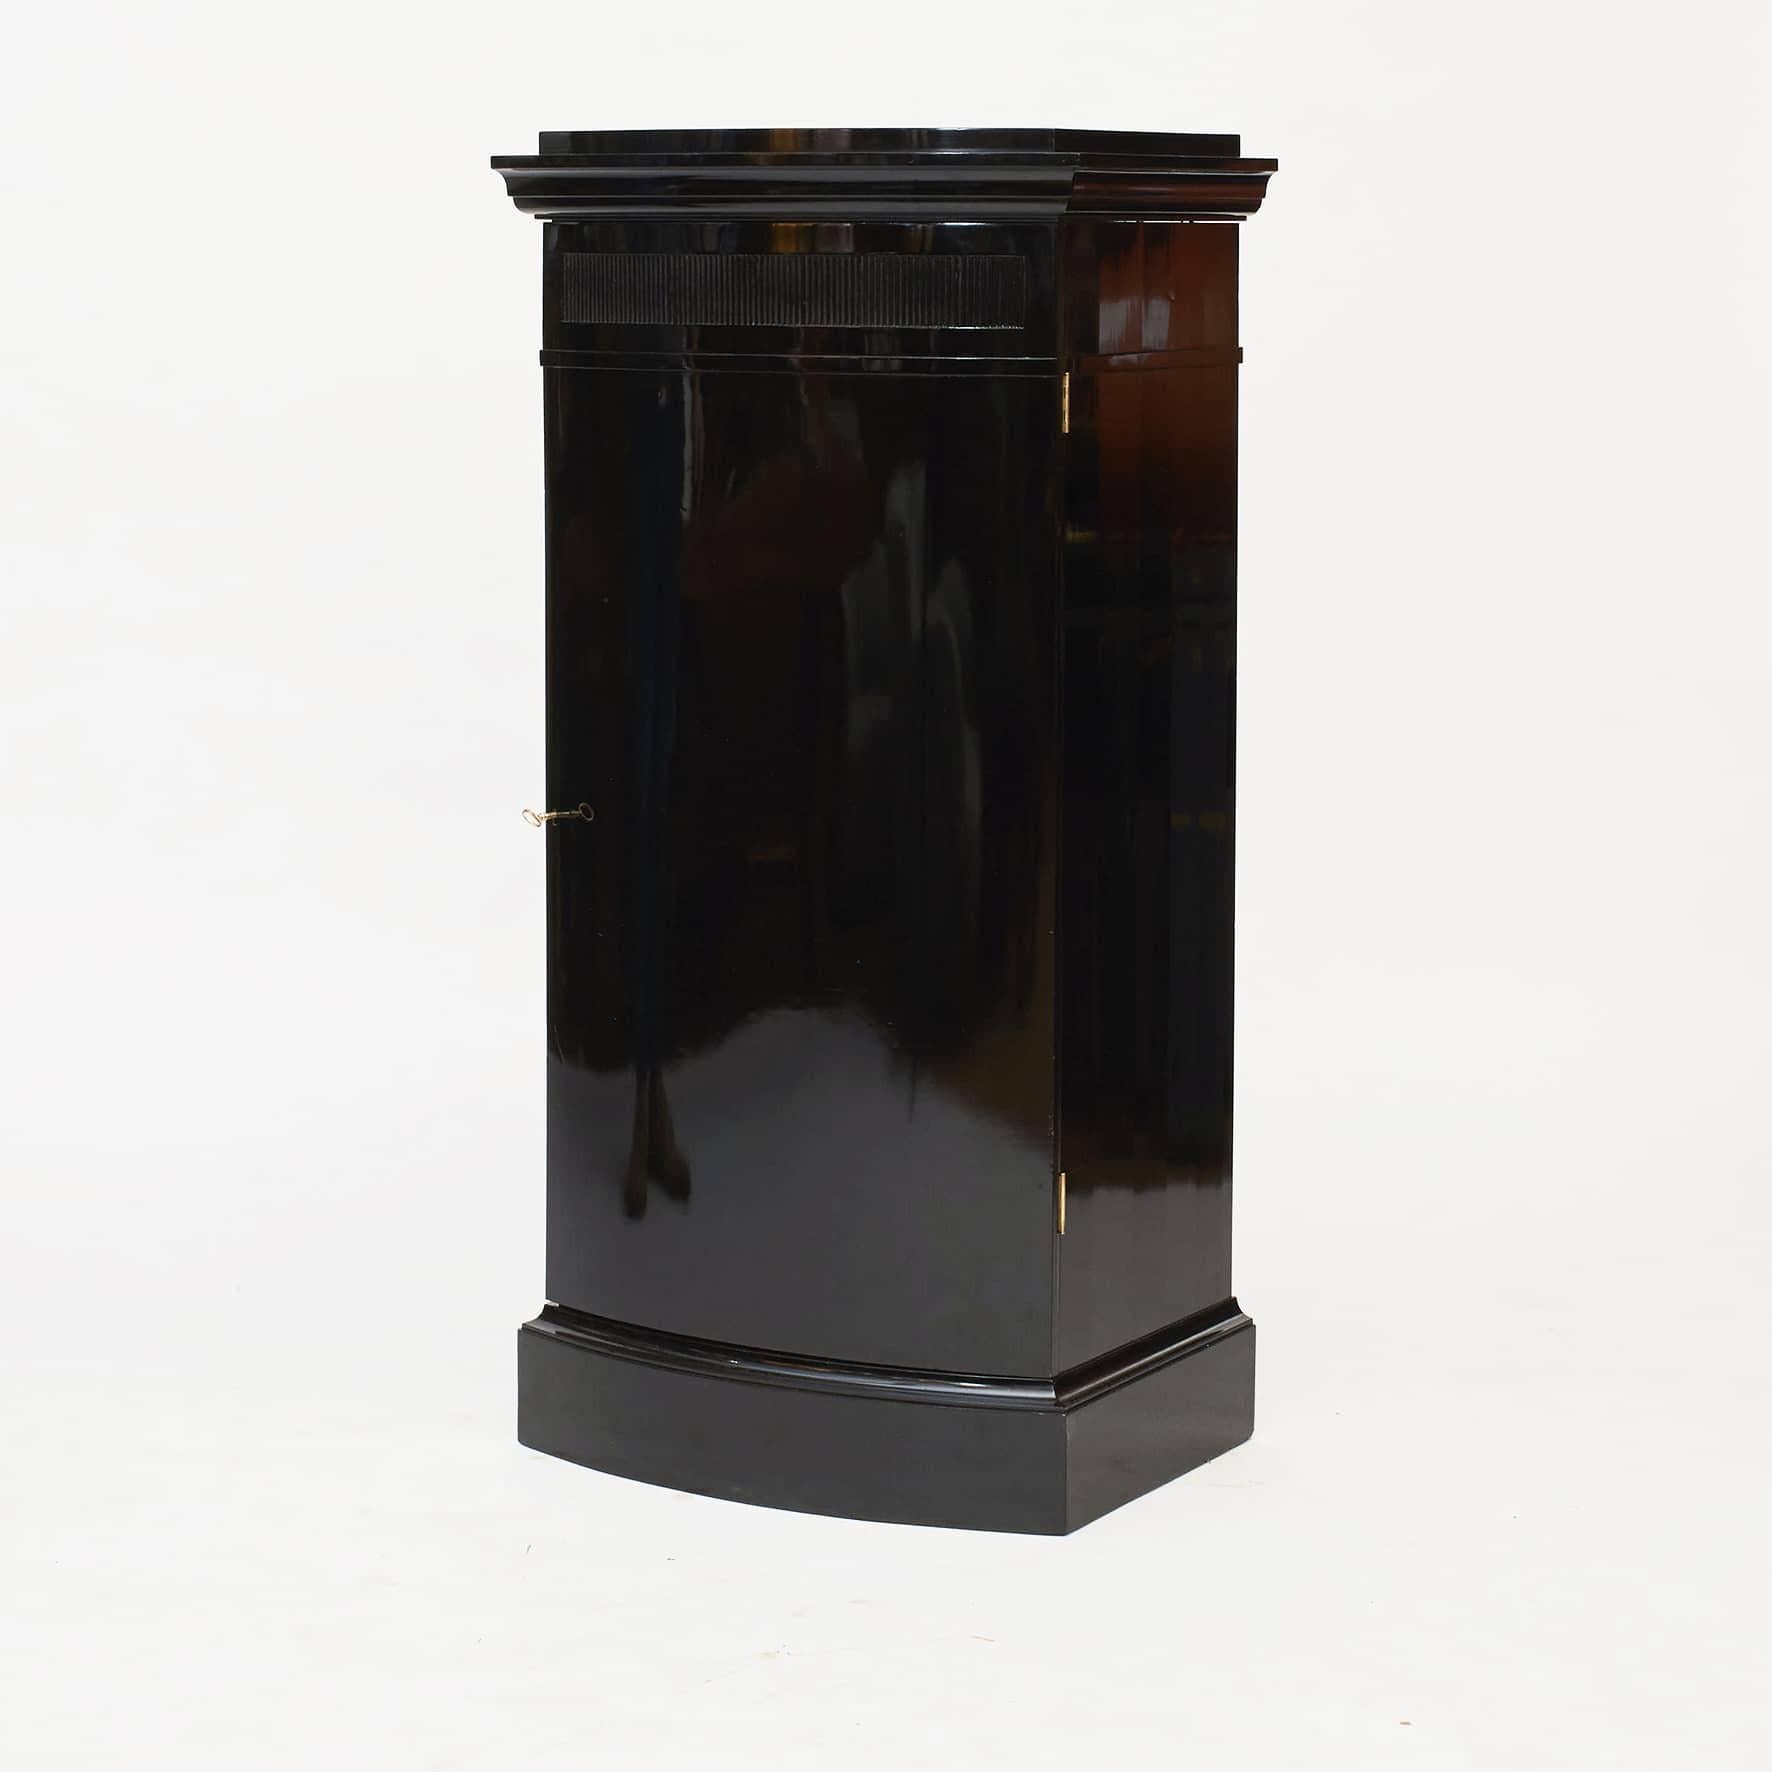 Danish art deco pedestal cabinet in ebonized mahogany.
Offers a convex front with a single door that opens to reveal five shelves.

Made in high quality by carpenter master Otto Meyer, Copenhagen 1916.
Inside of door with handwritten